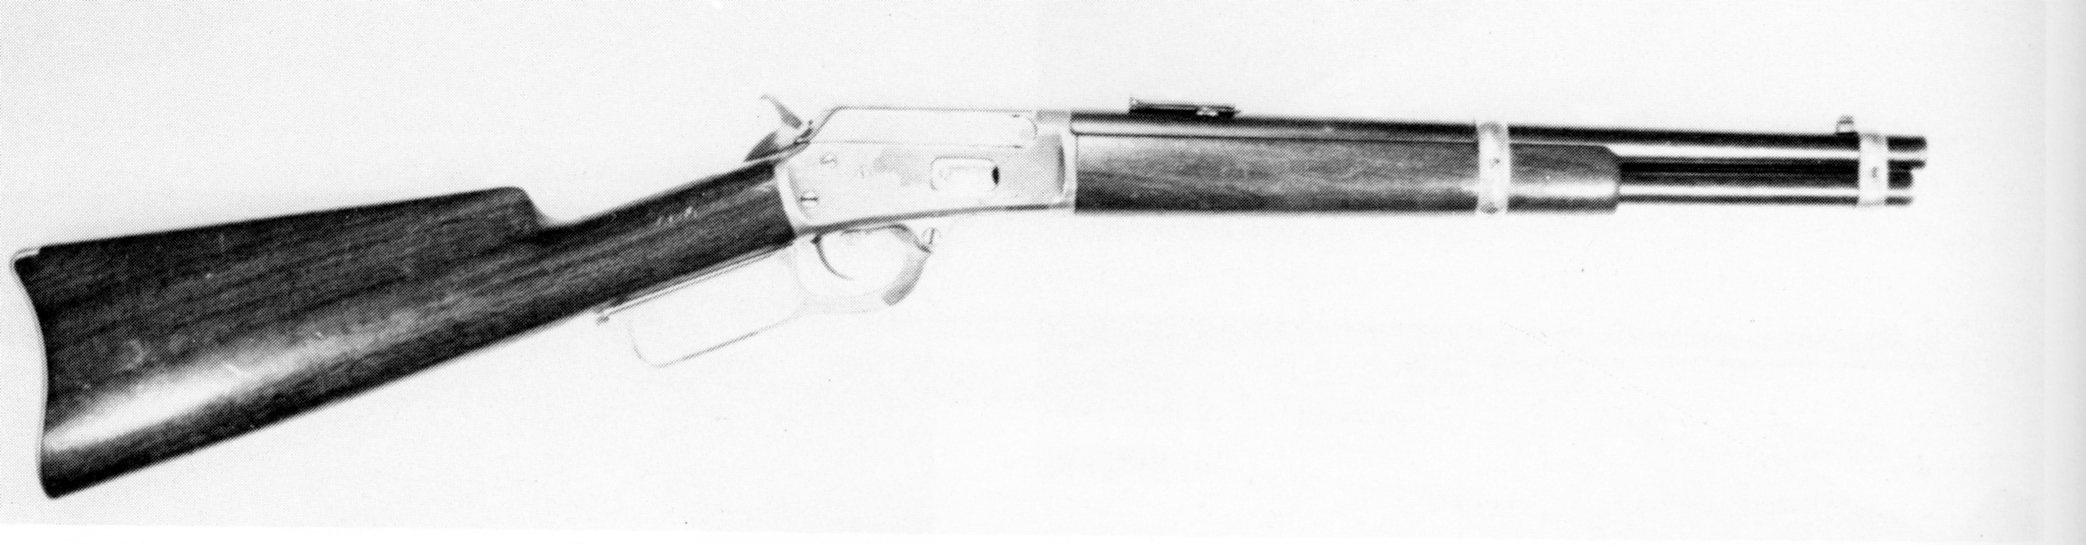 Model 1889 Lever-Action Rifle